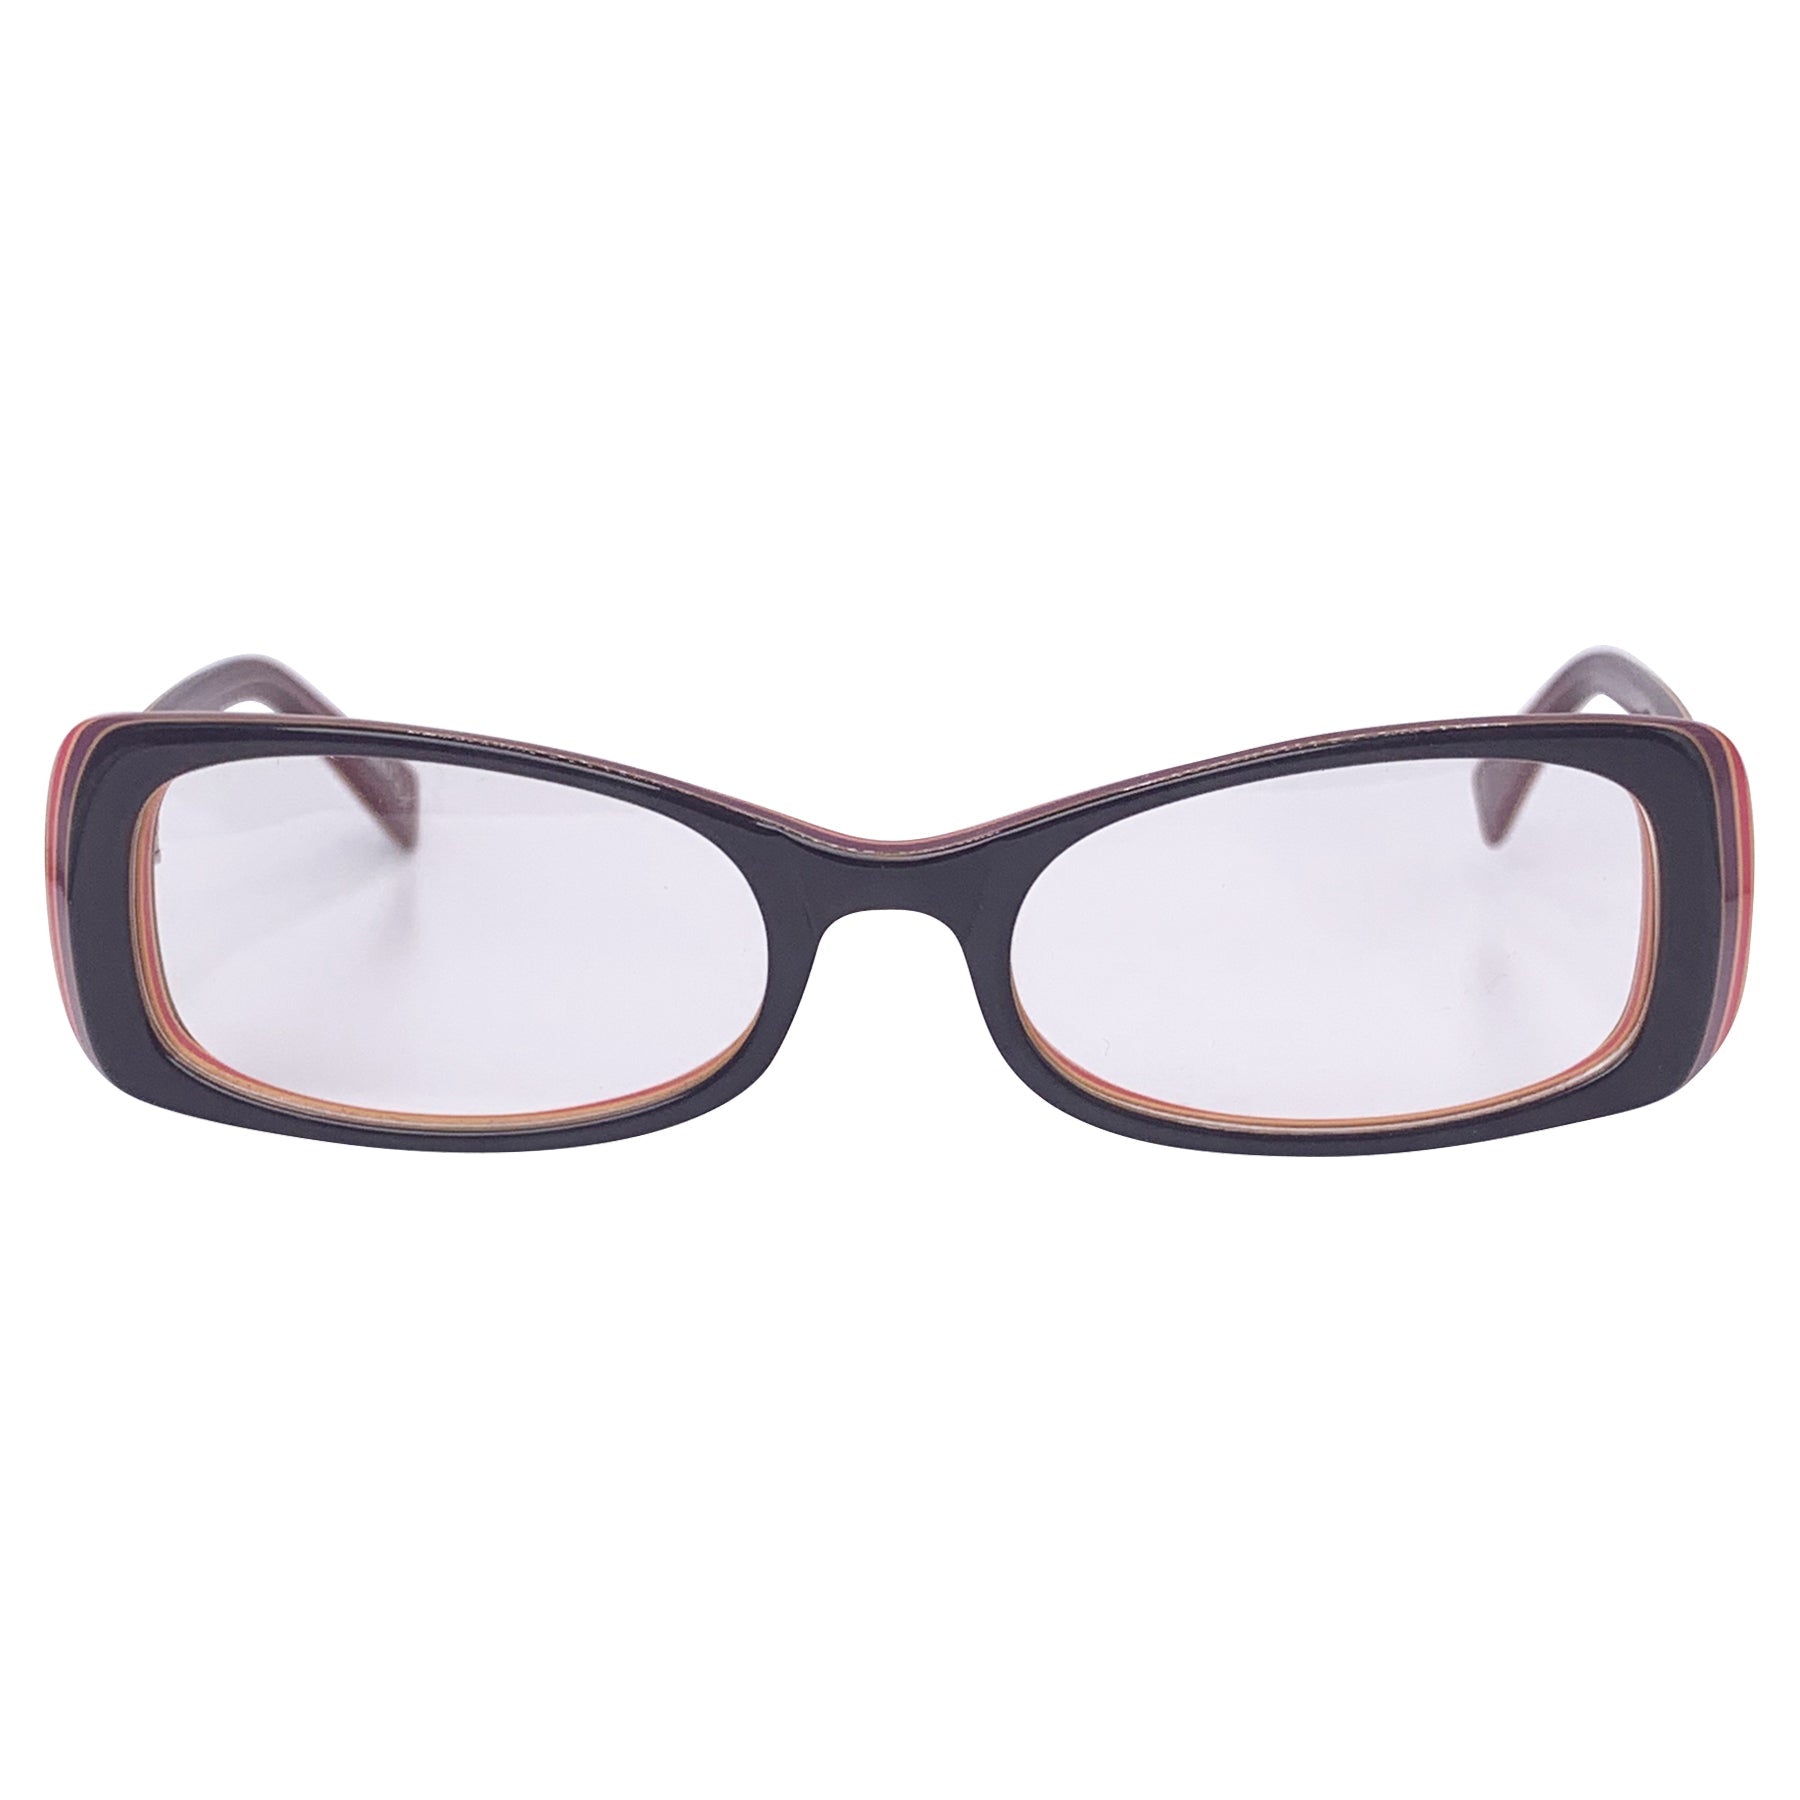 retro glasses with a colorful frame and clear lens